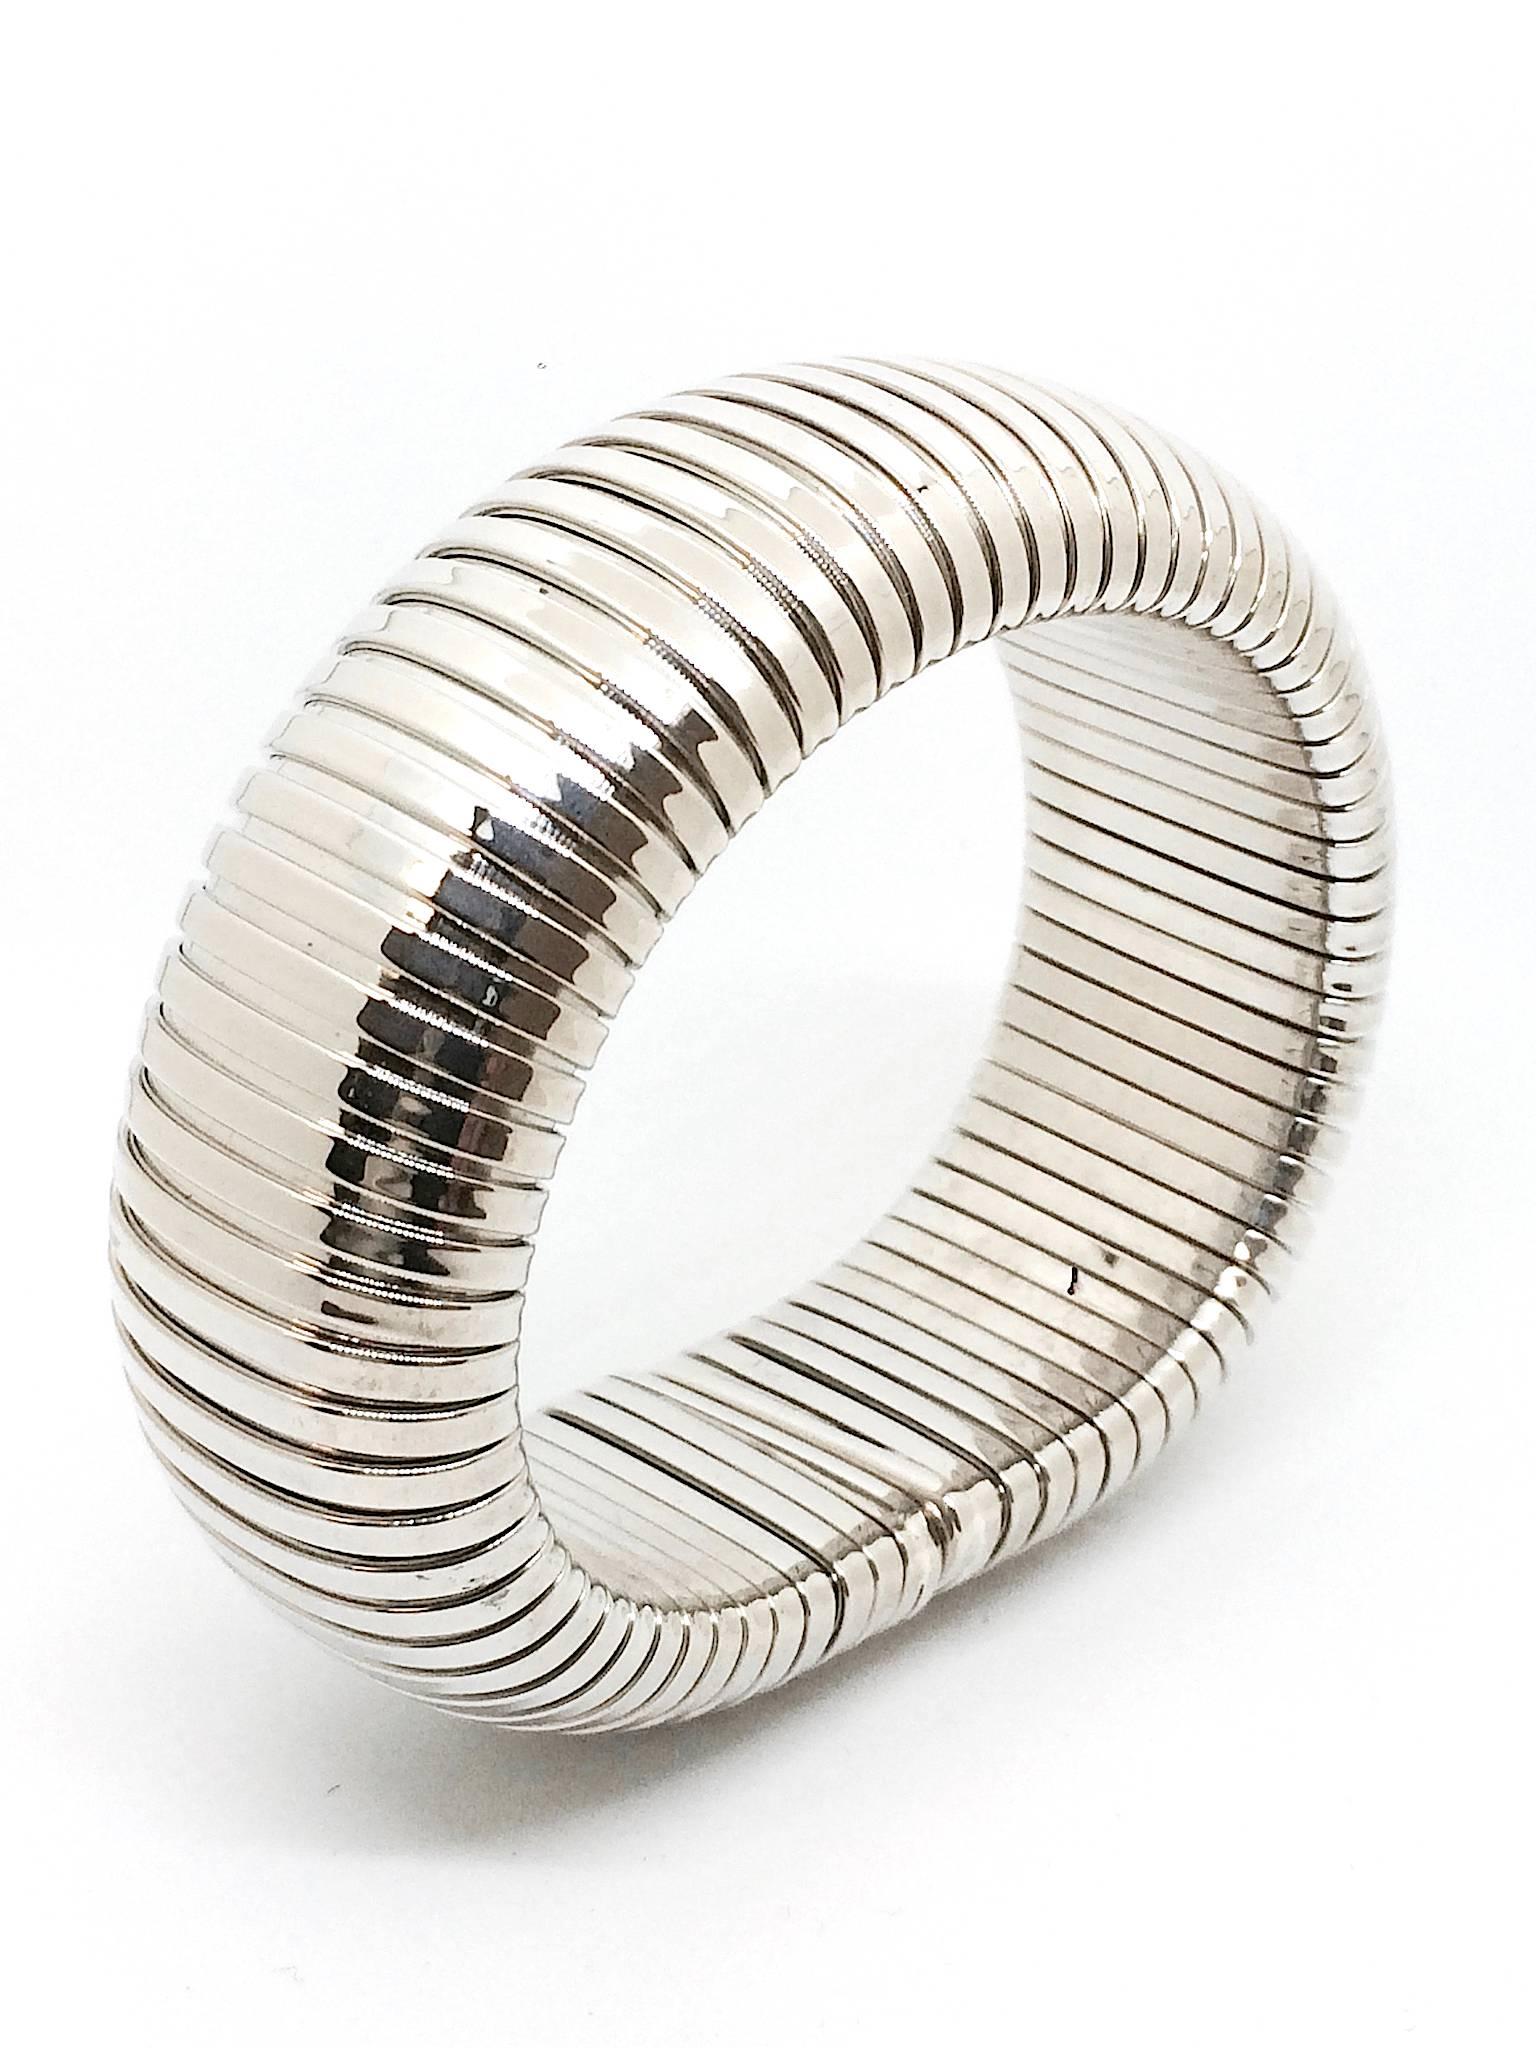 Carlo Weingrill tubogas domed cuff bracelet with steel spring inside. It is handmade in Italy in our atelier. This bracelet is one of our iconic bracelets with rolling too. You can combine both of them on your arms.
Different colors and sizes are